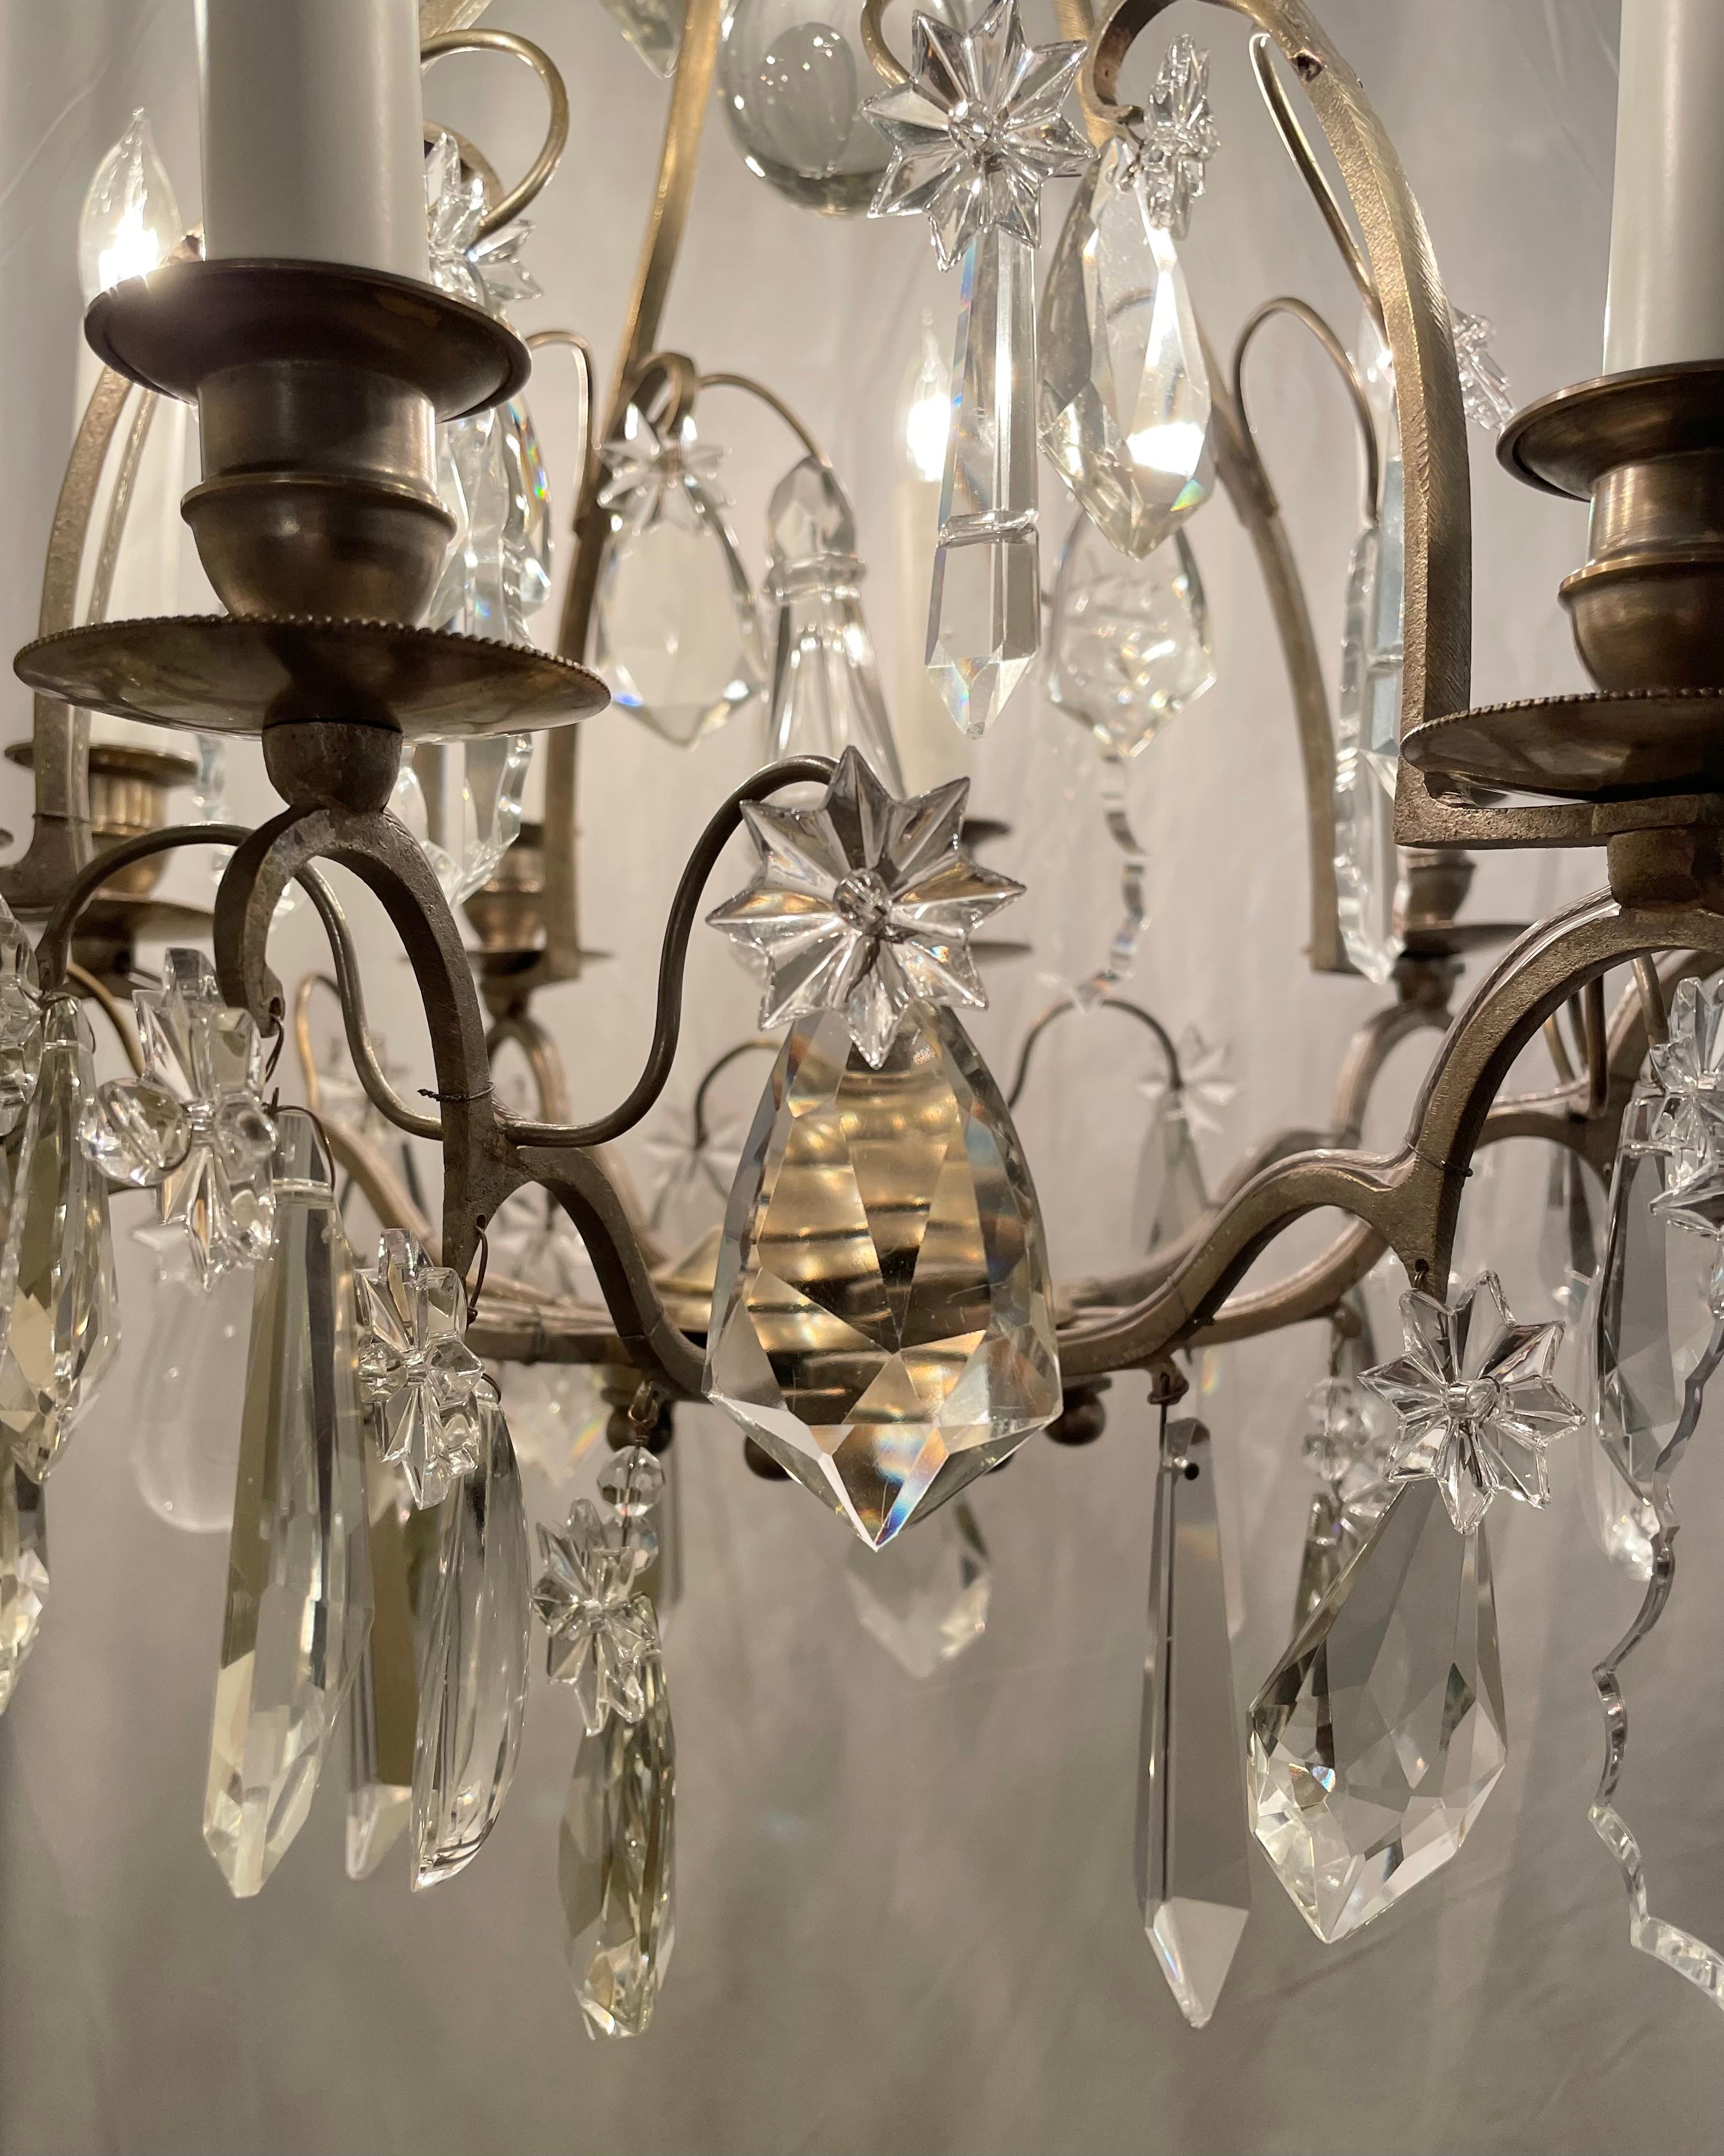 Antique French 8 Light Bronze and Crystal Chandelier, circa 1890-1910.